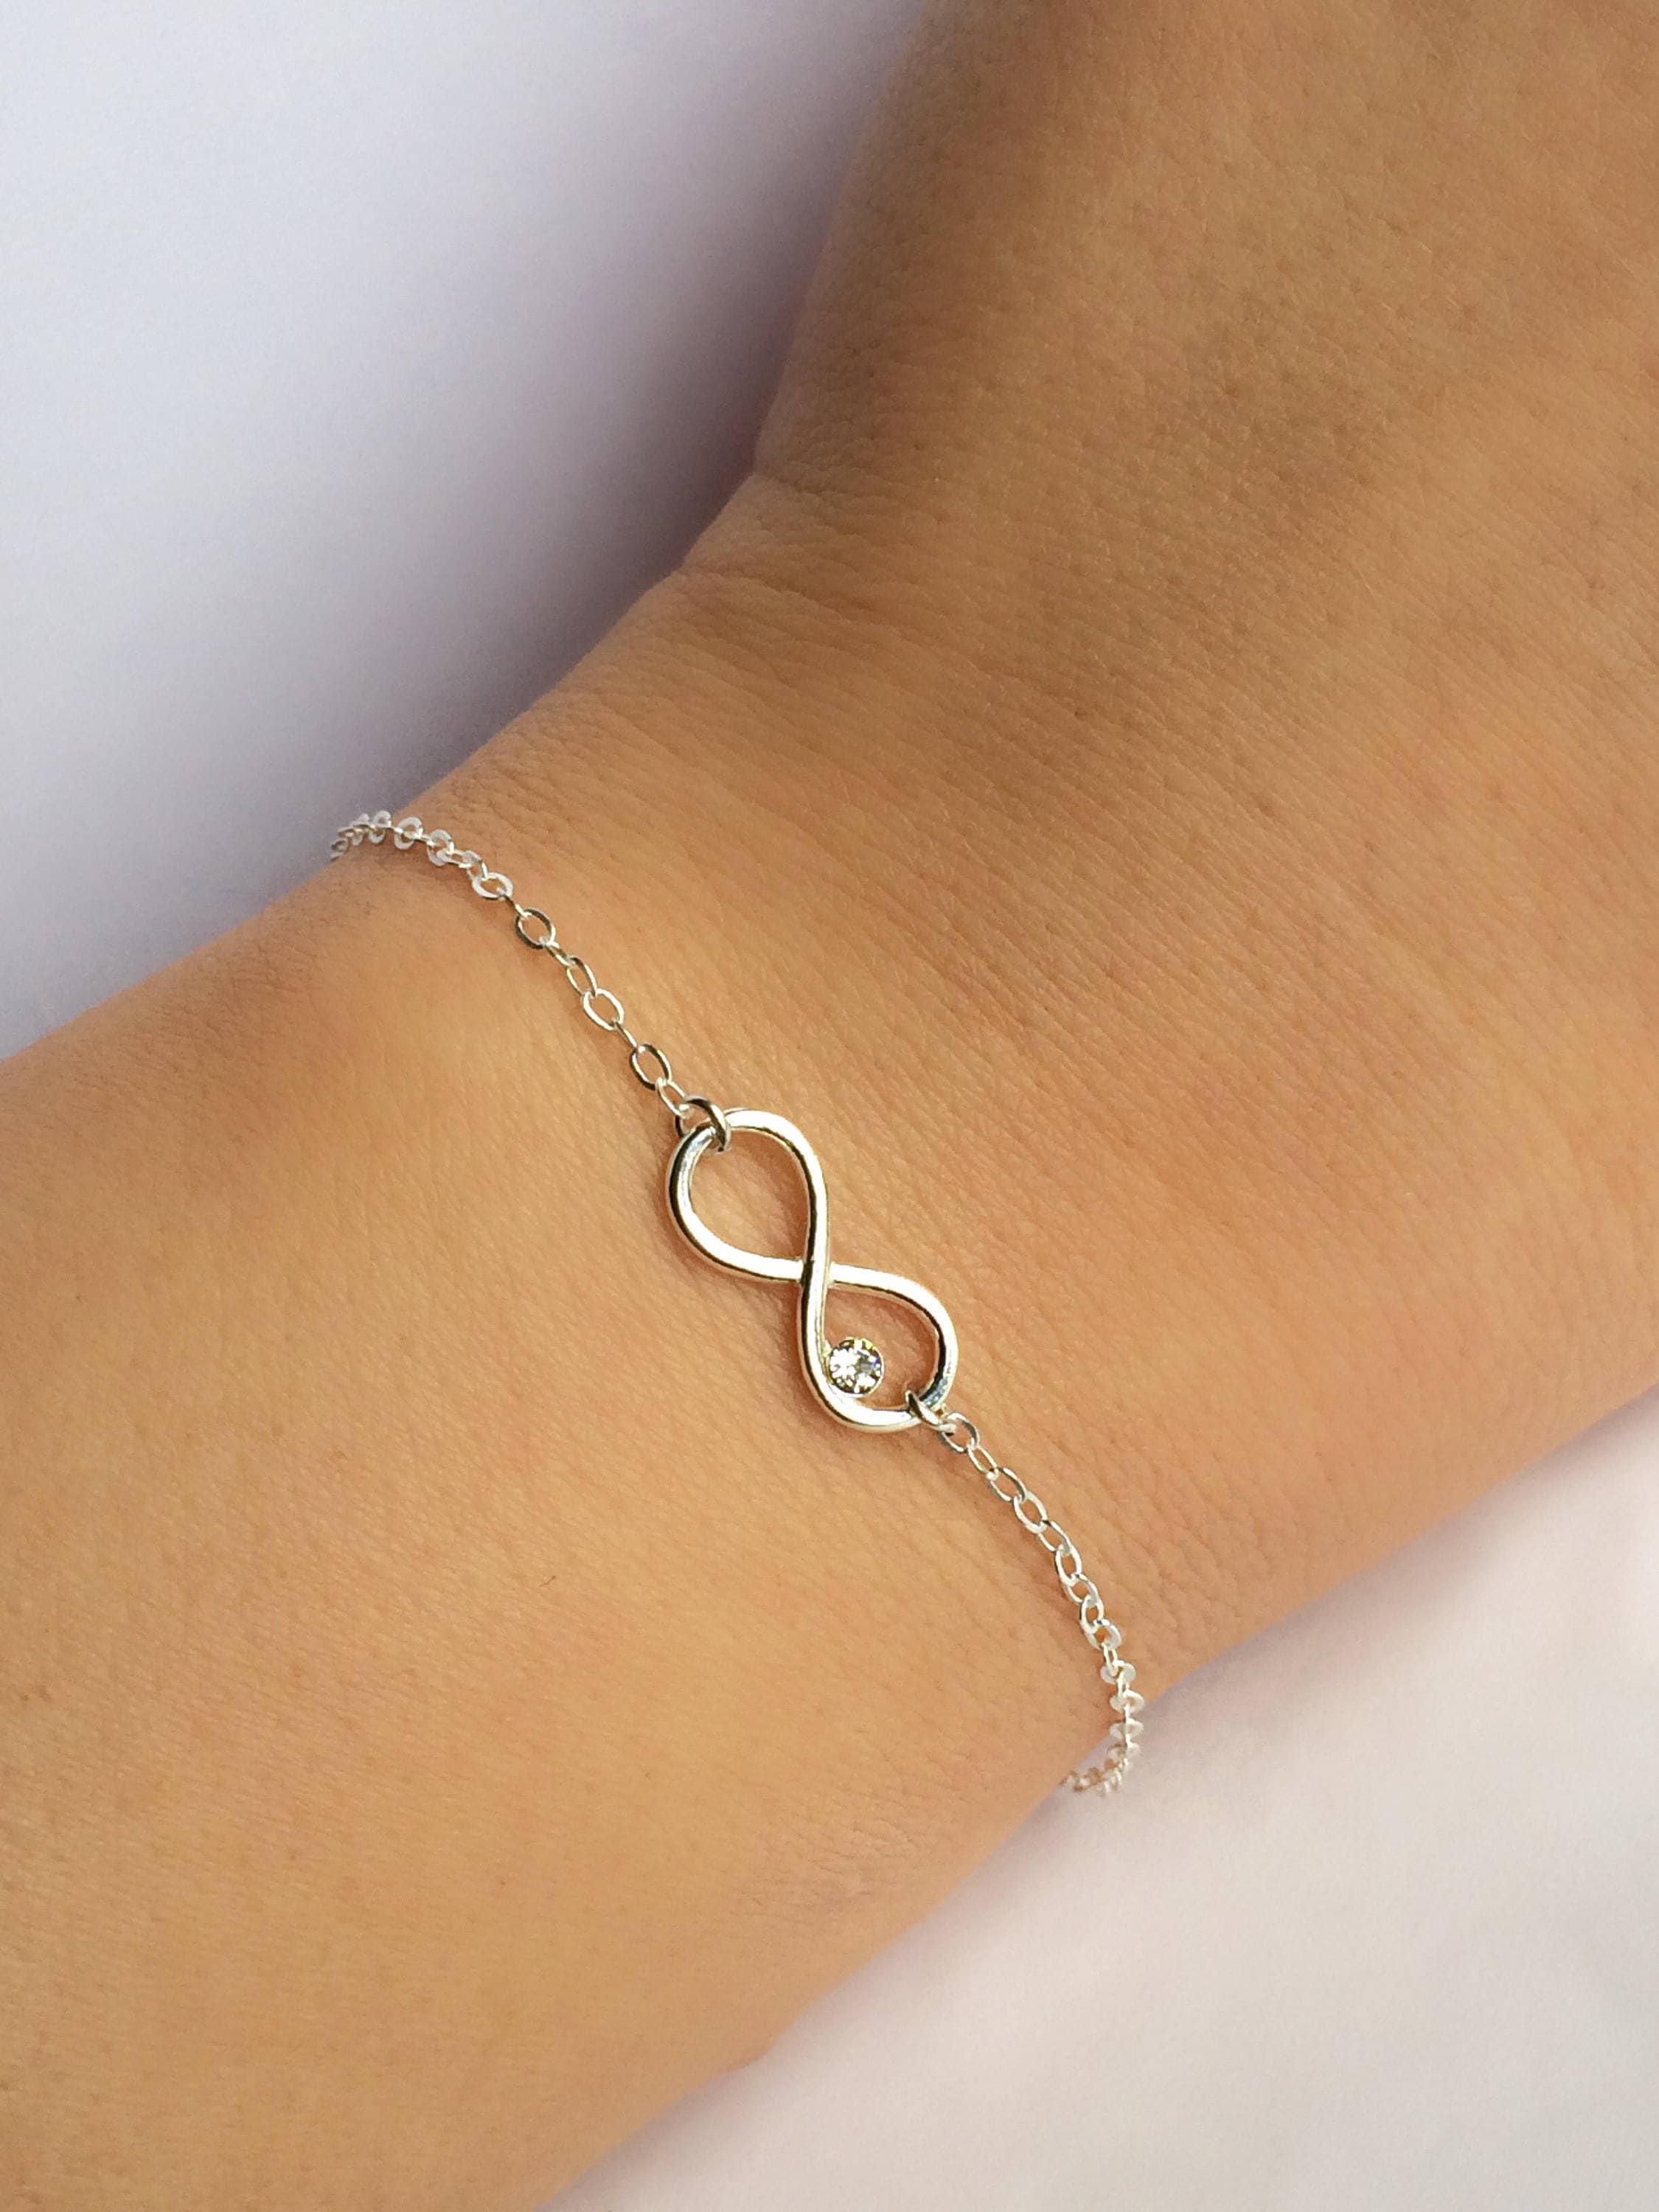 Diamond Accent Infinity Link Bracelet in Sterling Silver - 7.5